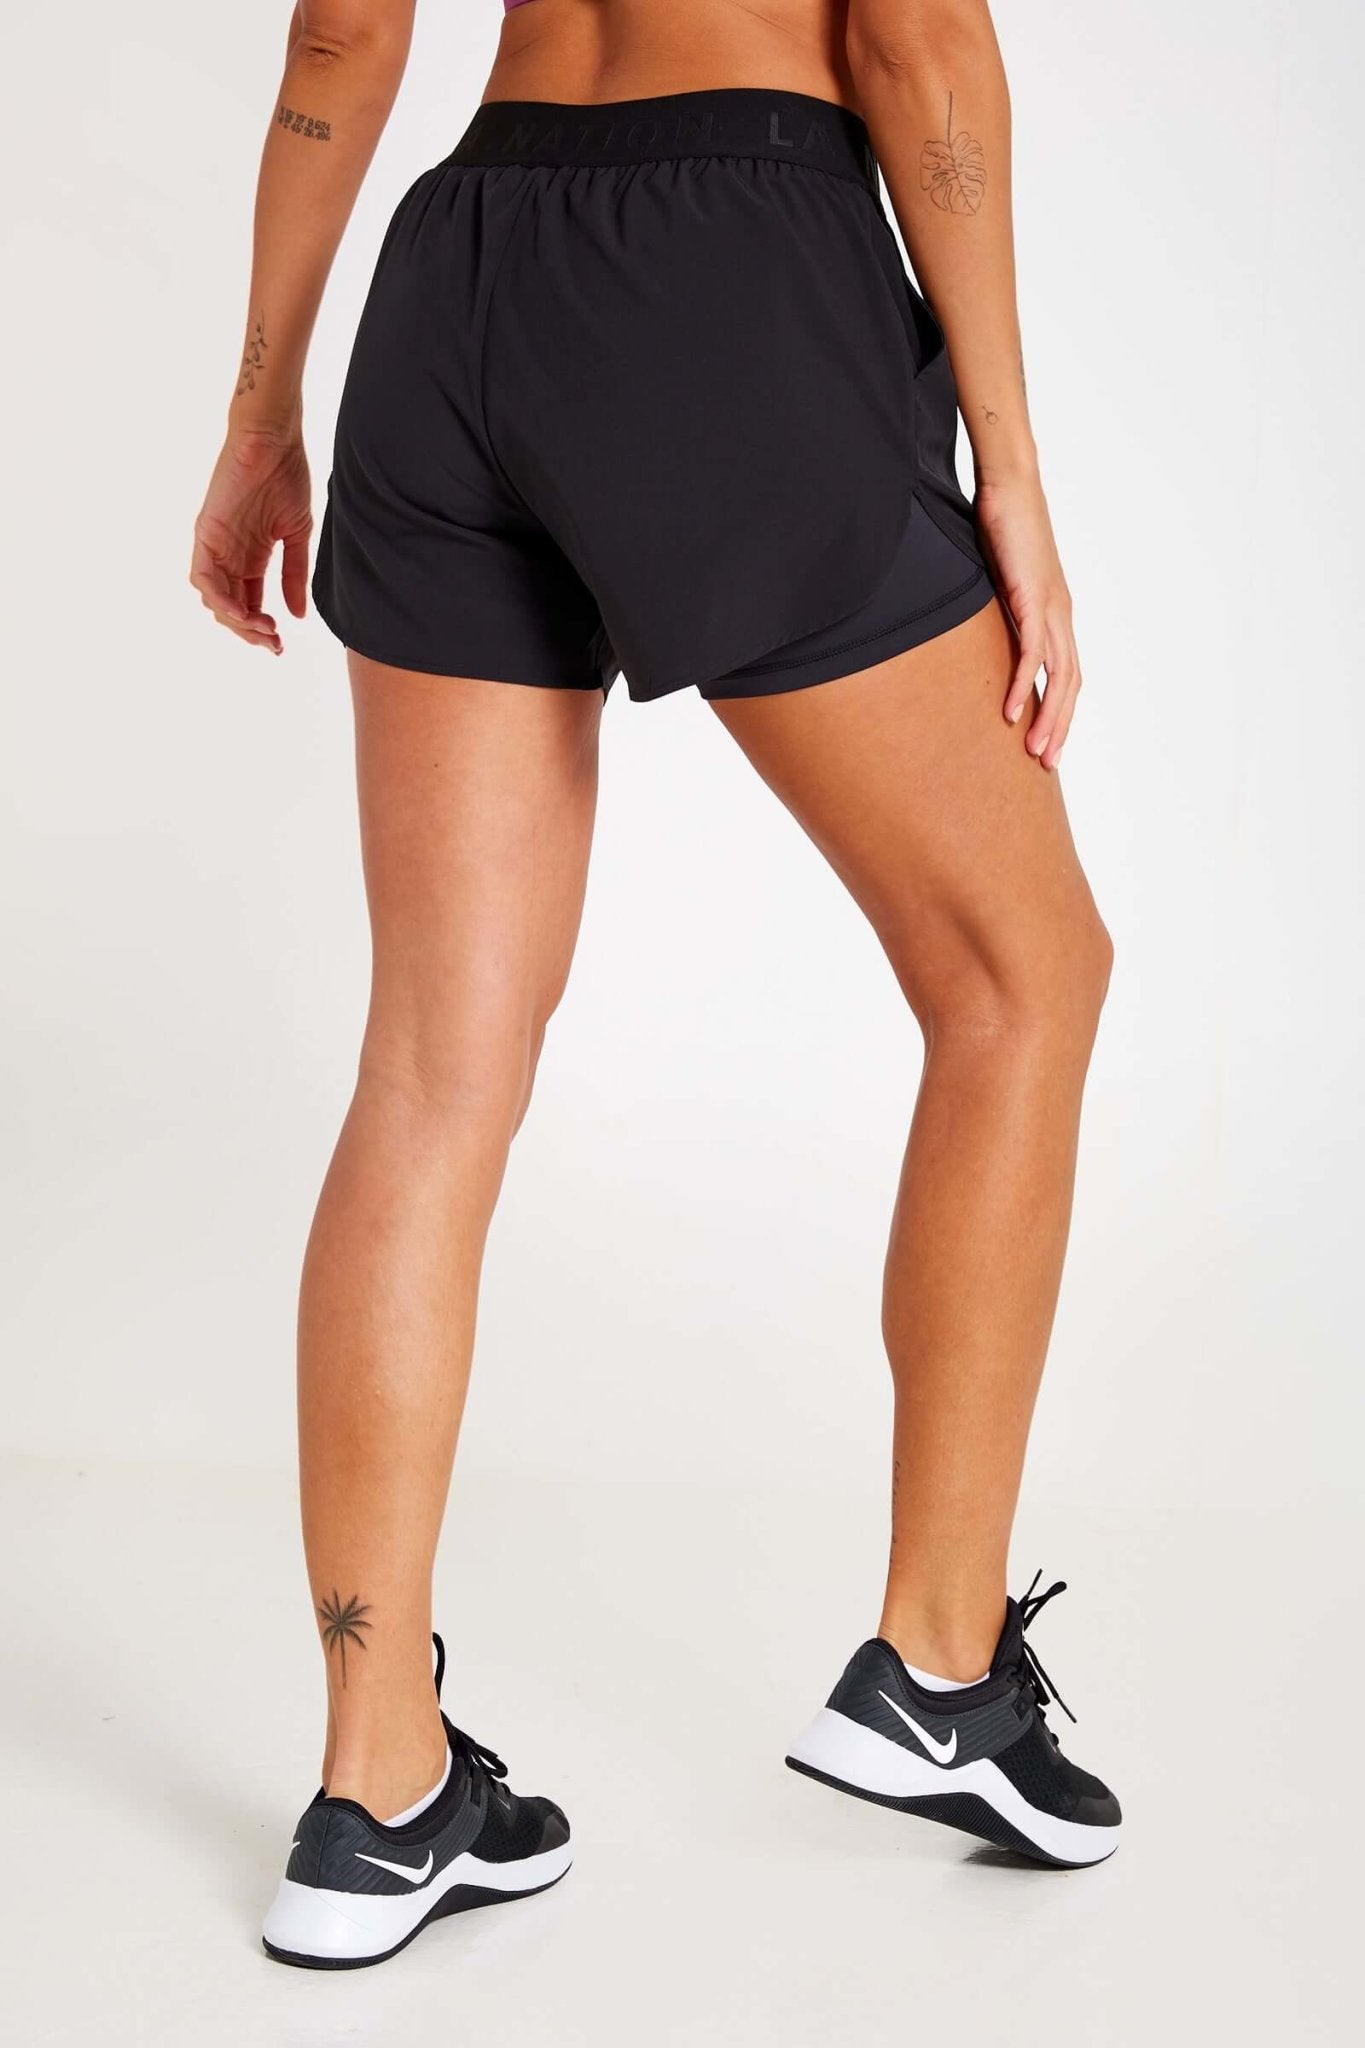 Quick Dry Double Layer Running Shorts With Pockets For Fitness Exercises  And Summer Running Will And Sandy Gift With Drop Delivery App From  Sexyhanz, $16.79